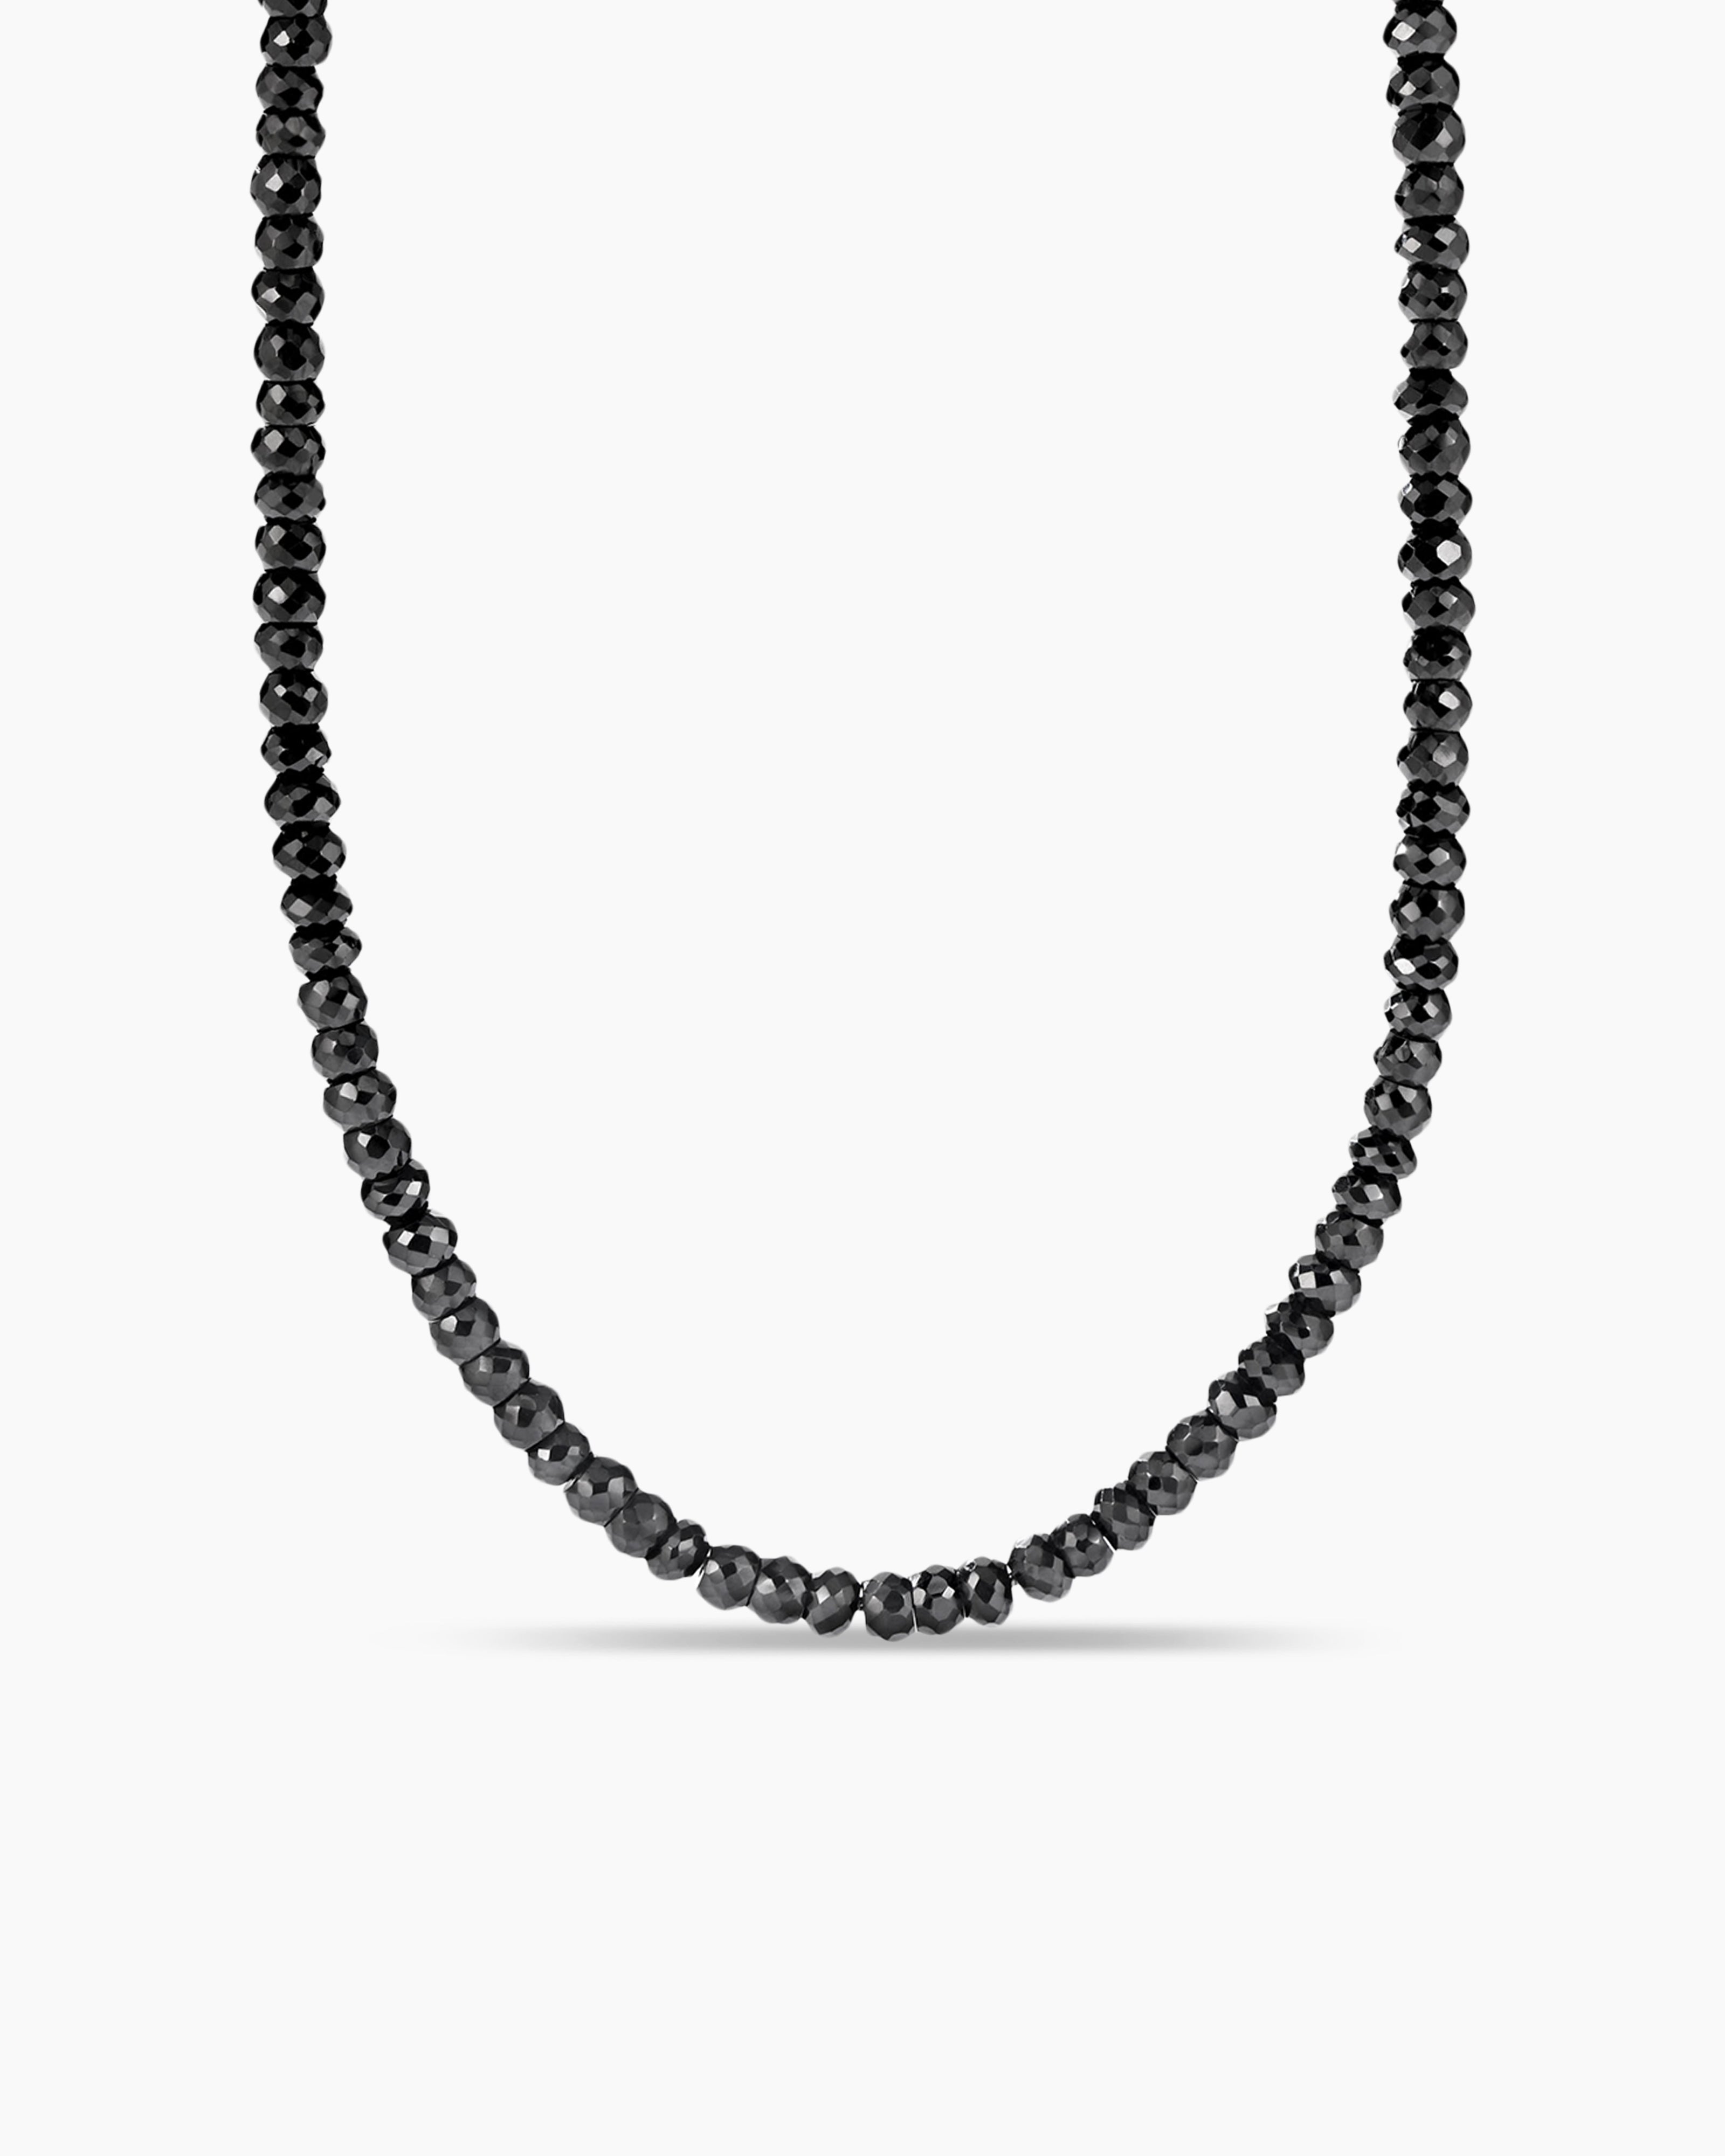 Amazon.com: Vatslacrestion Dainty Black Spinel Beaded Choker Necklace for  Women Trendy Natural Shiny 2.5 mm Black Spinal Crystal Stone Necklace  Sterling Silver Chain Adjustable: Clothing, Shoes & Jewelry